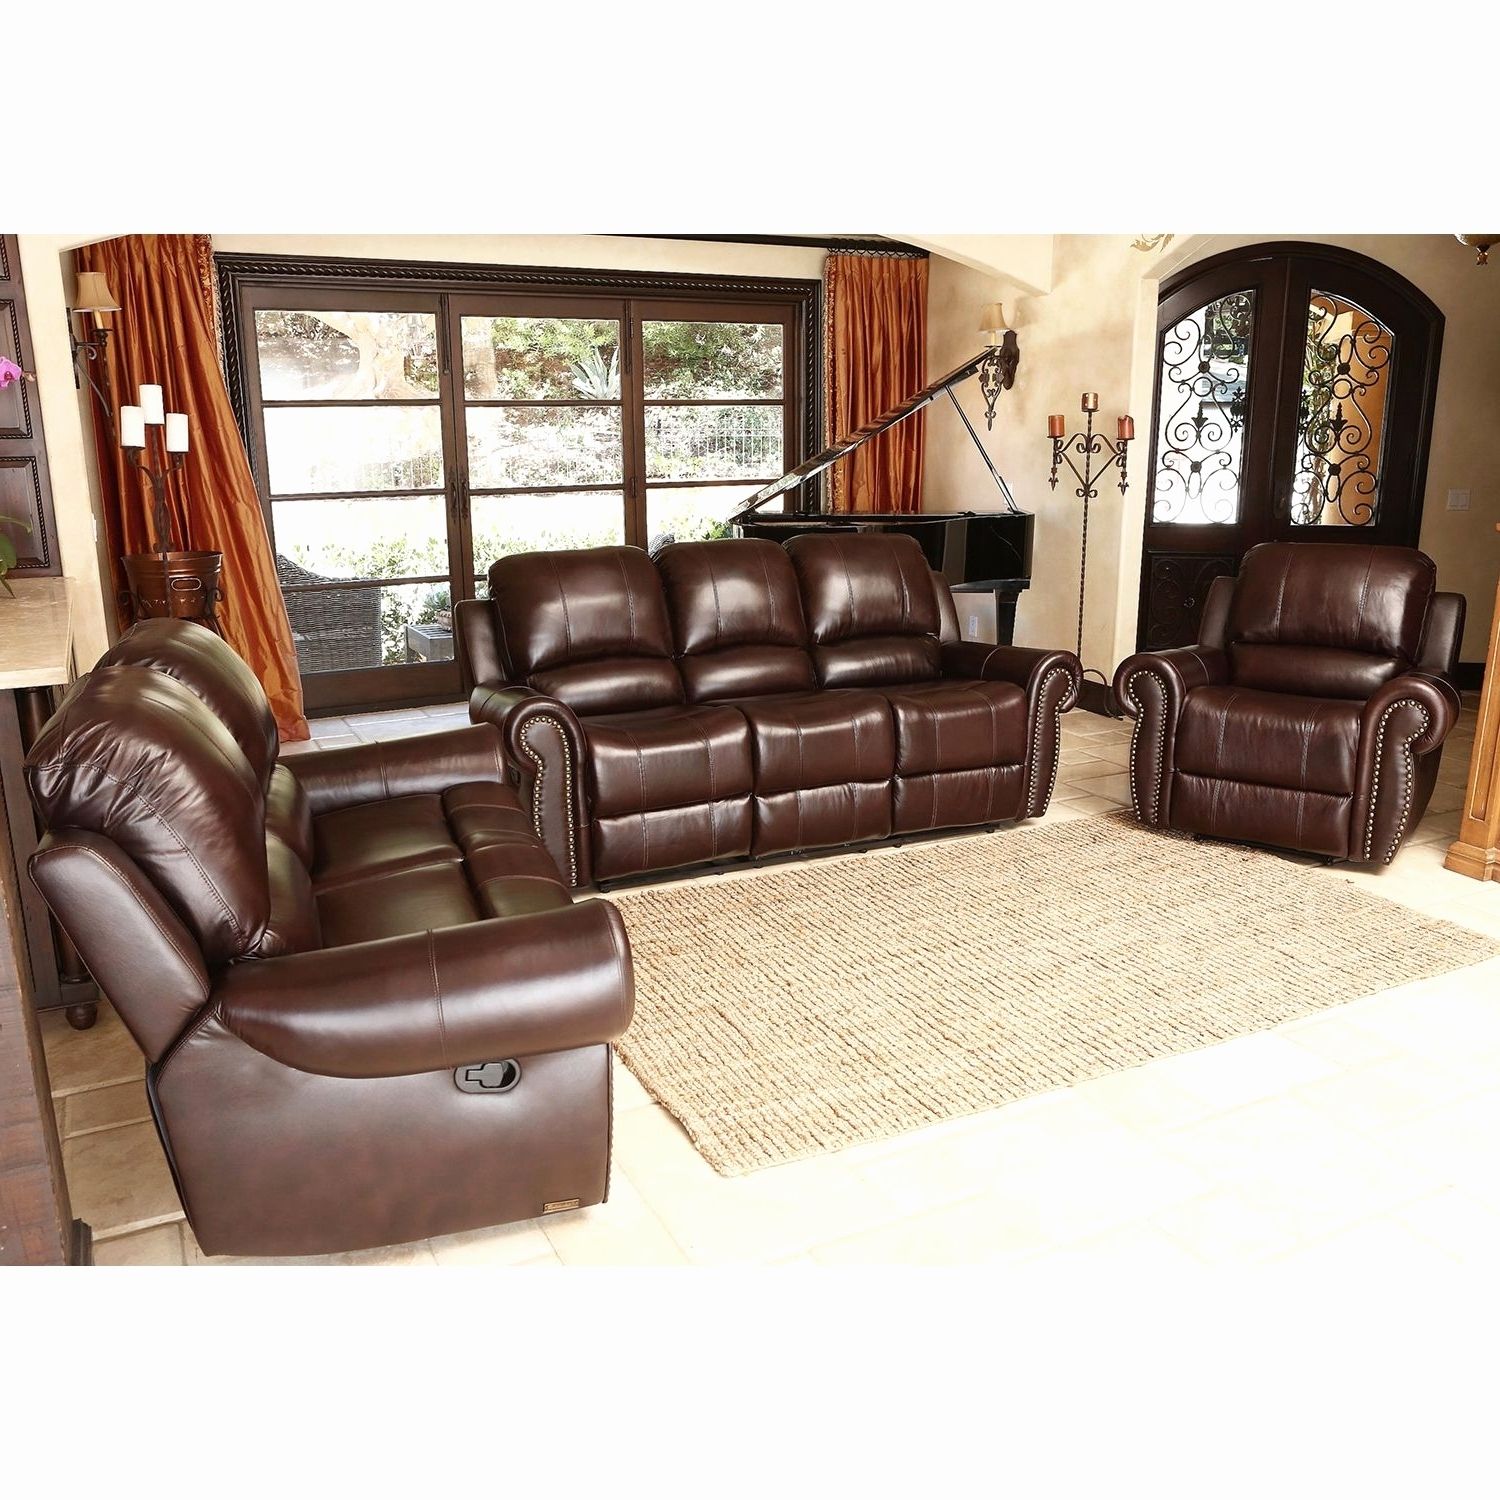 Sams Club Leather Sofa Gallery Of Sectional Sofas At Sam S